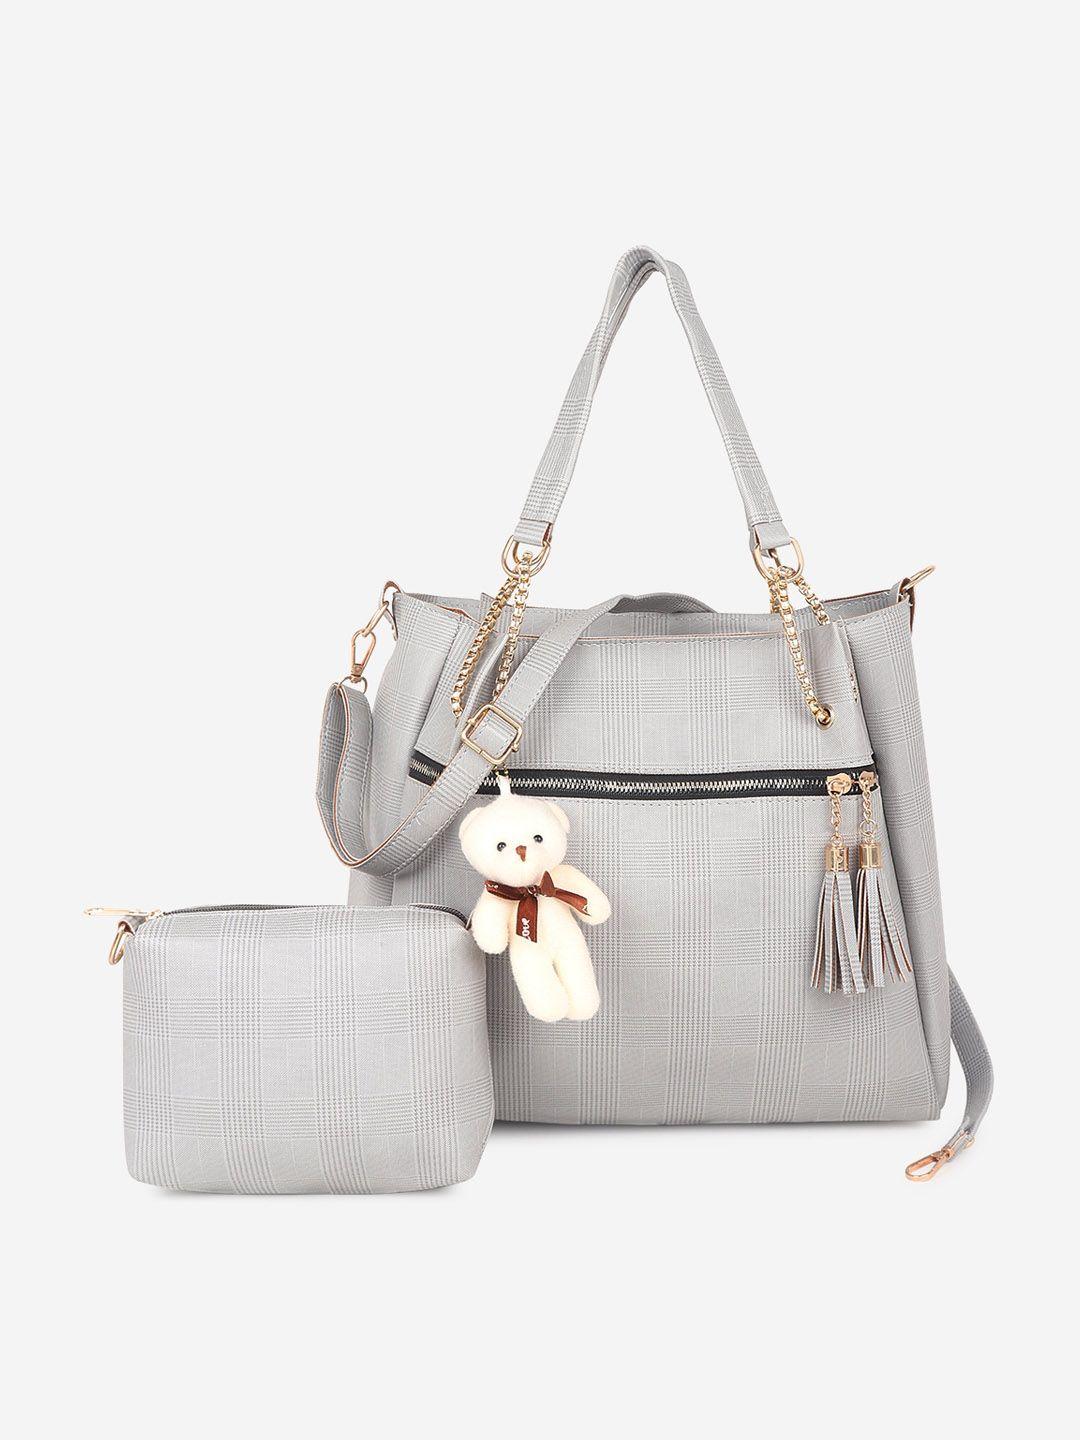 stropcarry grey pu structured handheld bag with tasselled